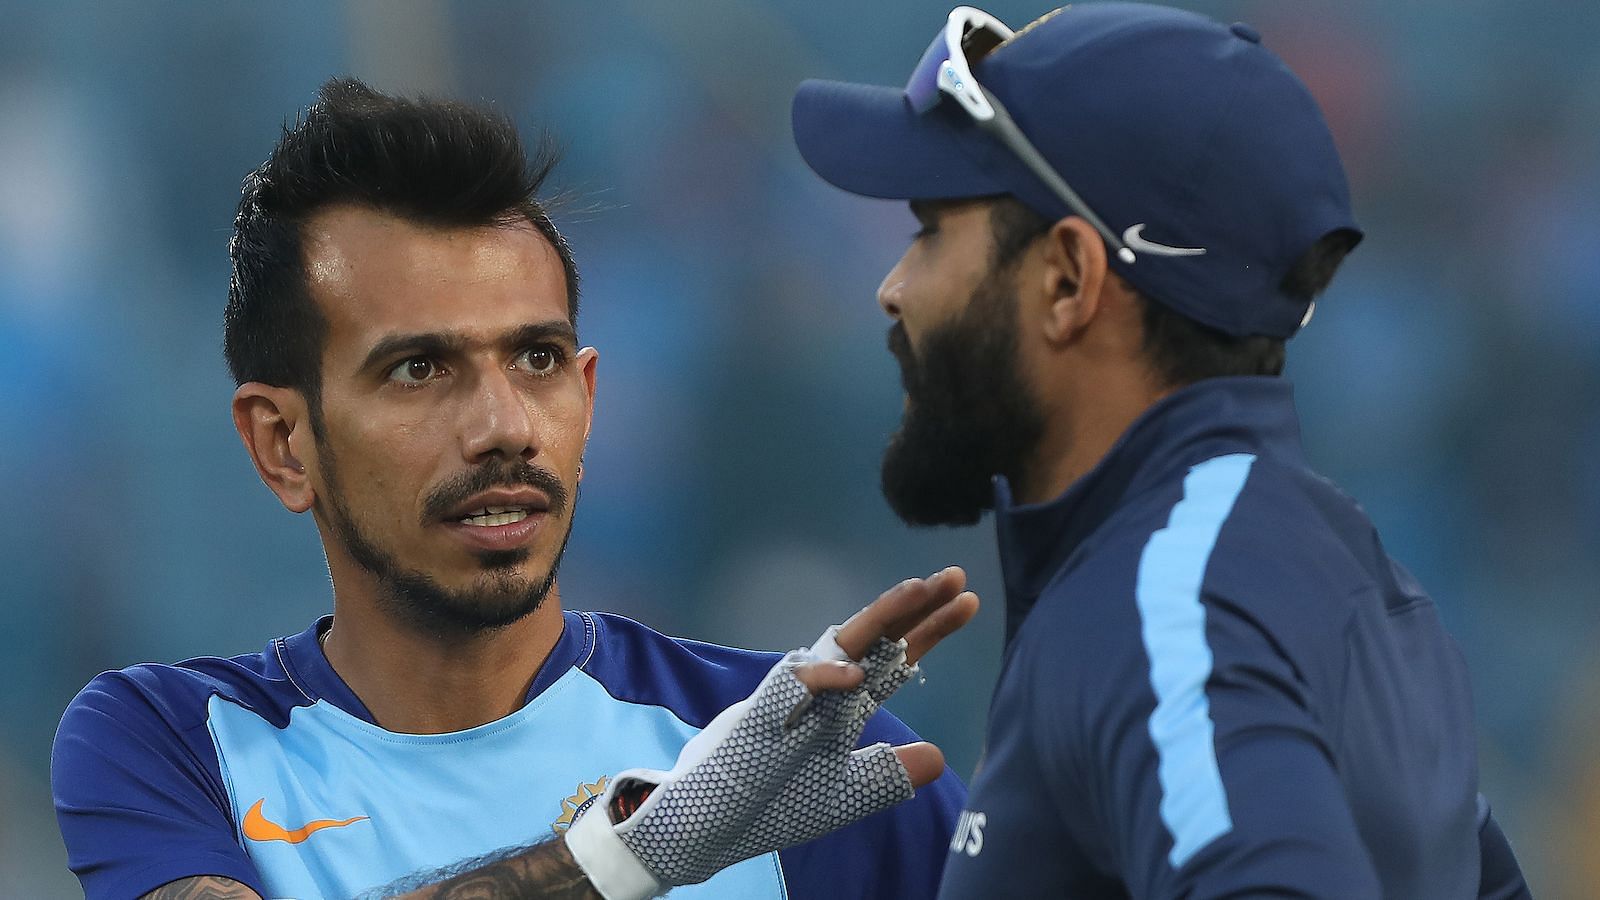 India used Chahal as a concussion substitute for Jadeja in the T20I series-opener vs Australia.